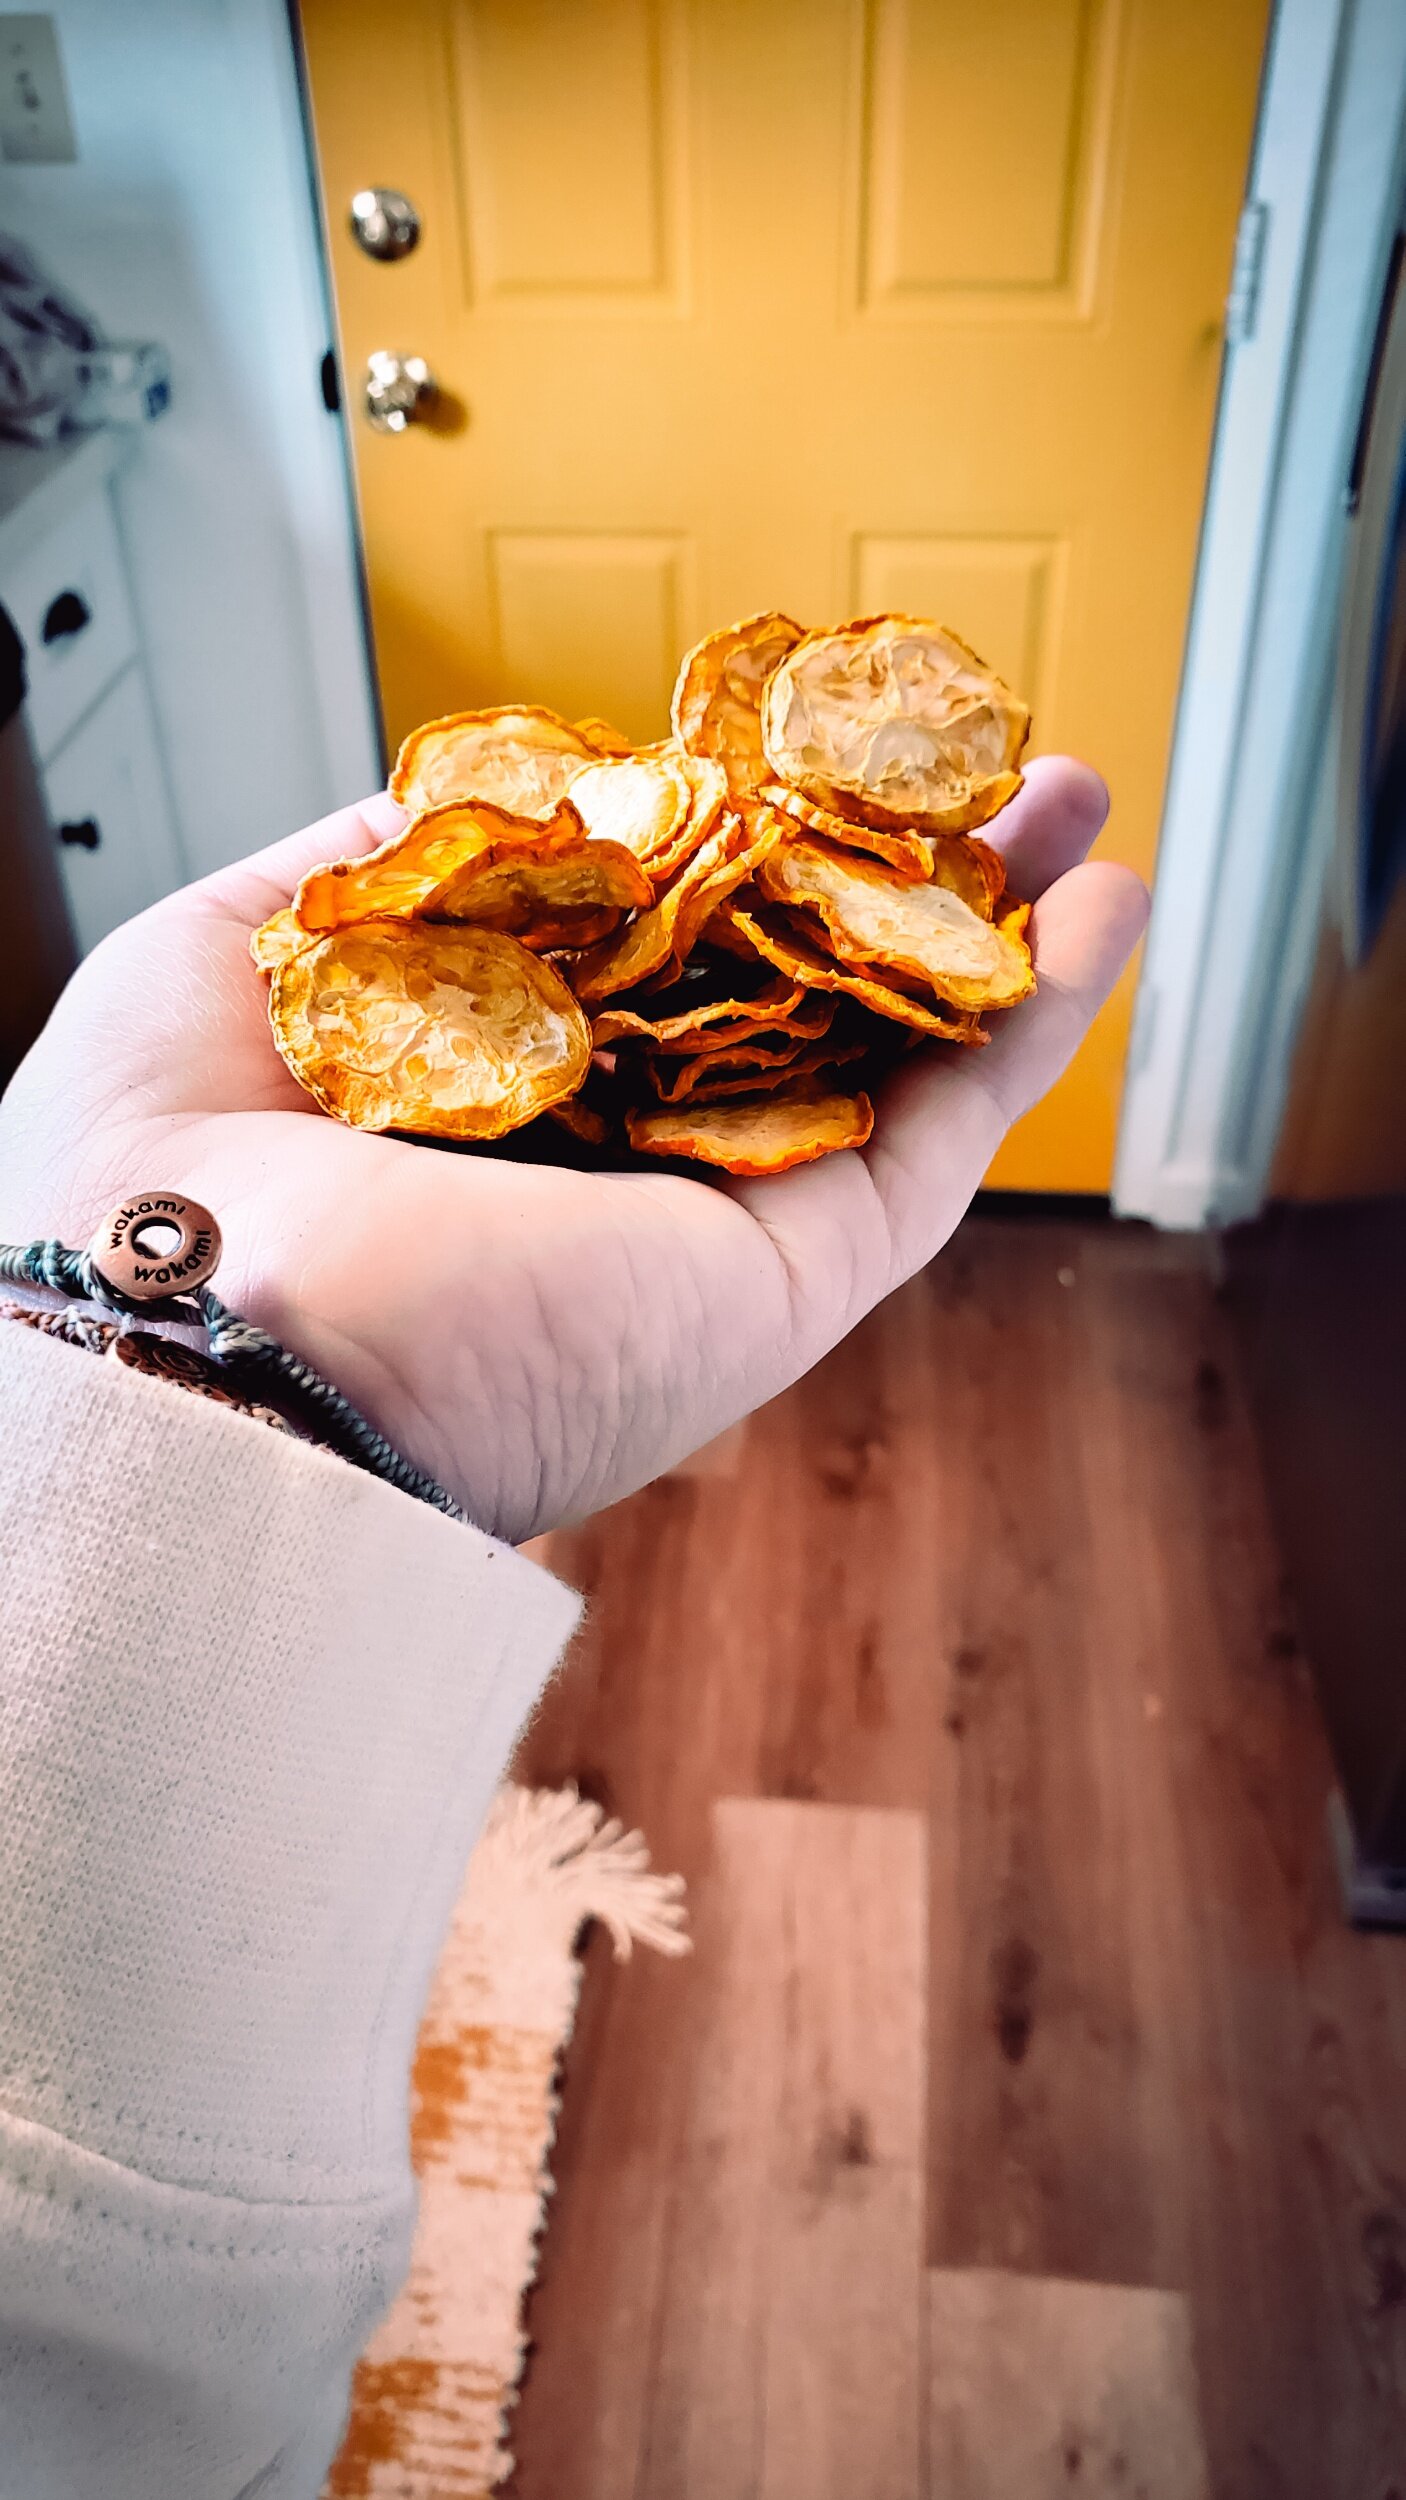 Salt and Vinegar Dehydrated Vegetable Chips By Bessie Roaming - Backpacking Recipes - Recipes for Adventures - Dehydrated Recipes - Paleo Backpacking Recipes